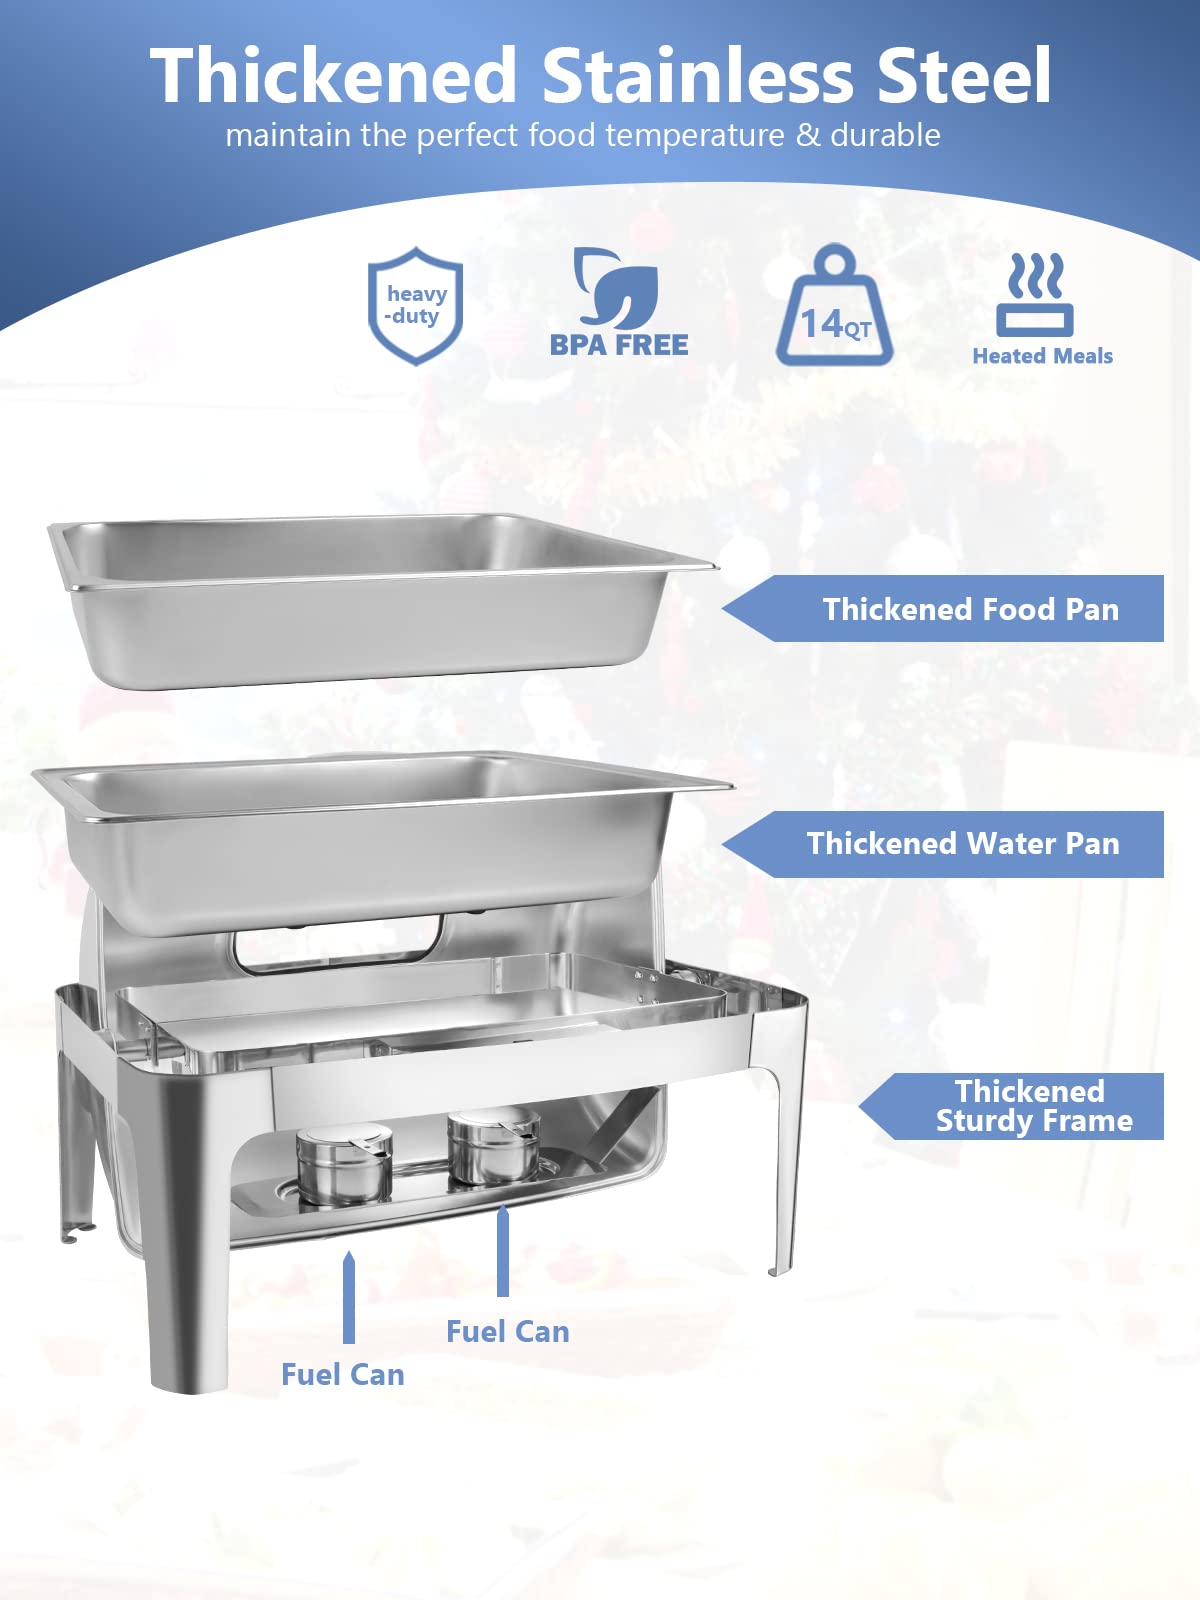 Granvell Rectangular Roll Top Chafing Dish Buffet Set, Catering Food Warmer for Parties, Wedding, Birthday, Christmas, 1 Full Size & 2 Half-Size Chafing Server Dish, 14QT Water Pan